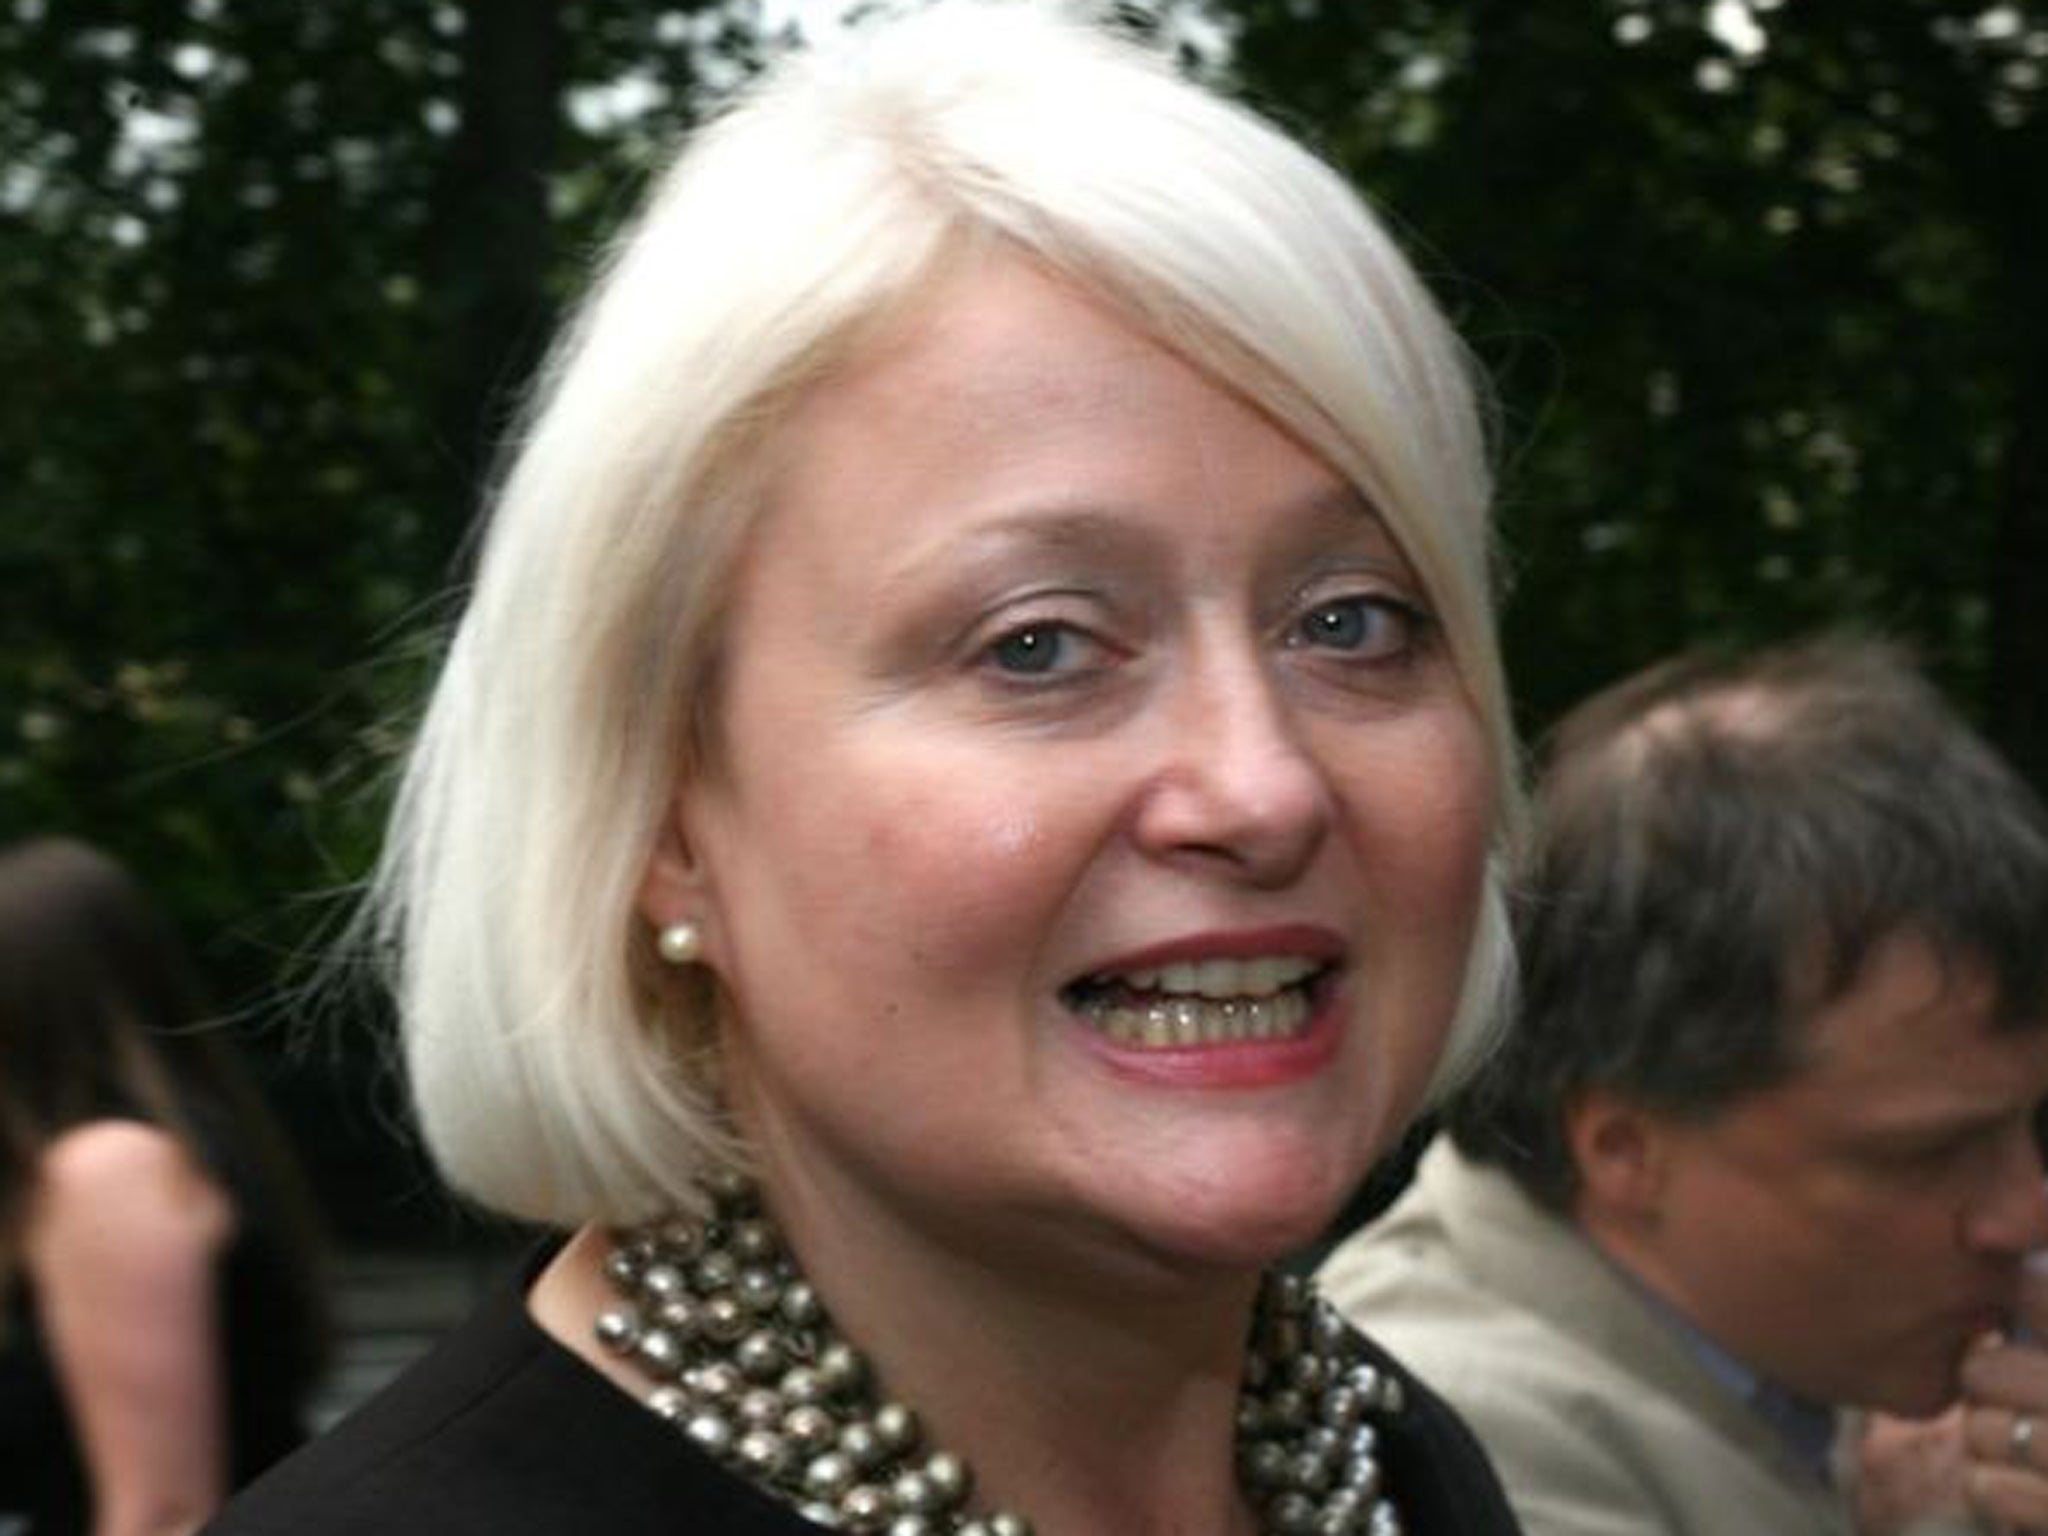 MP Siobhain McDonagh accepted "very substantial" damages and a public apology at the High Court phone hacking